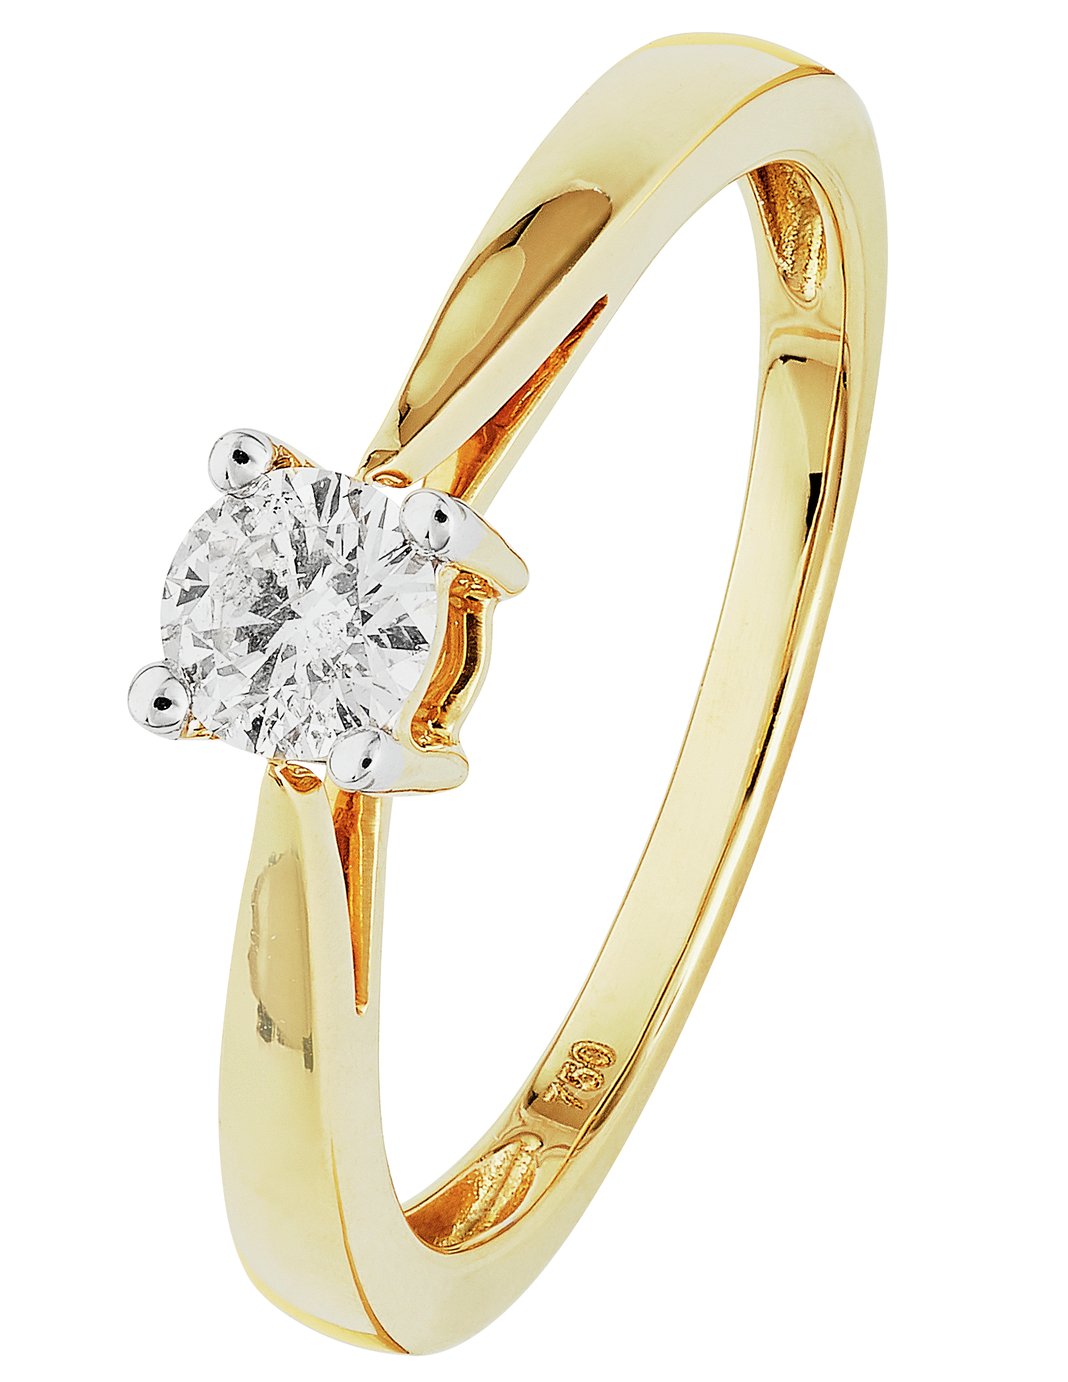 Revere 18ct Gold 0.25ct Diamond Solitaire Ring Review